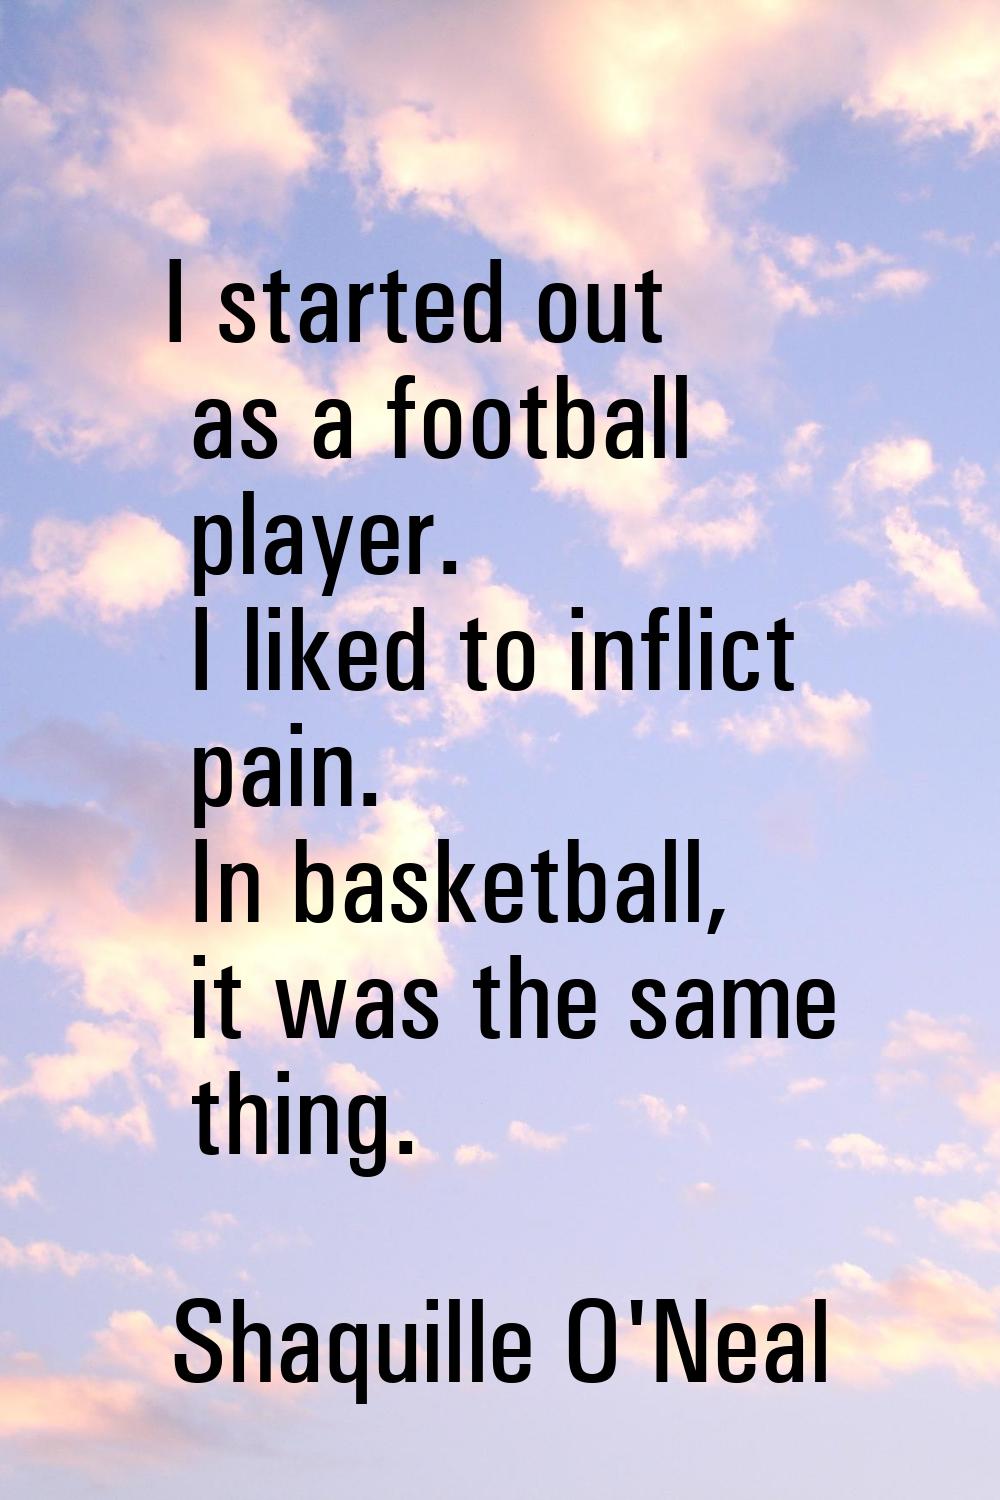 I started out as a football player. I liked to inflict pain. In basketball, it was the same thing.